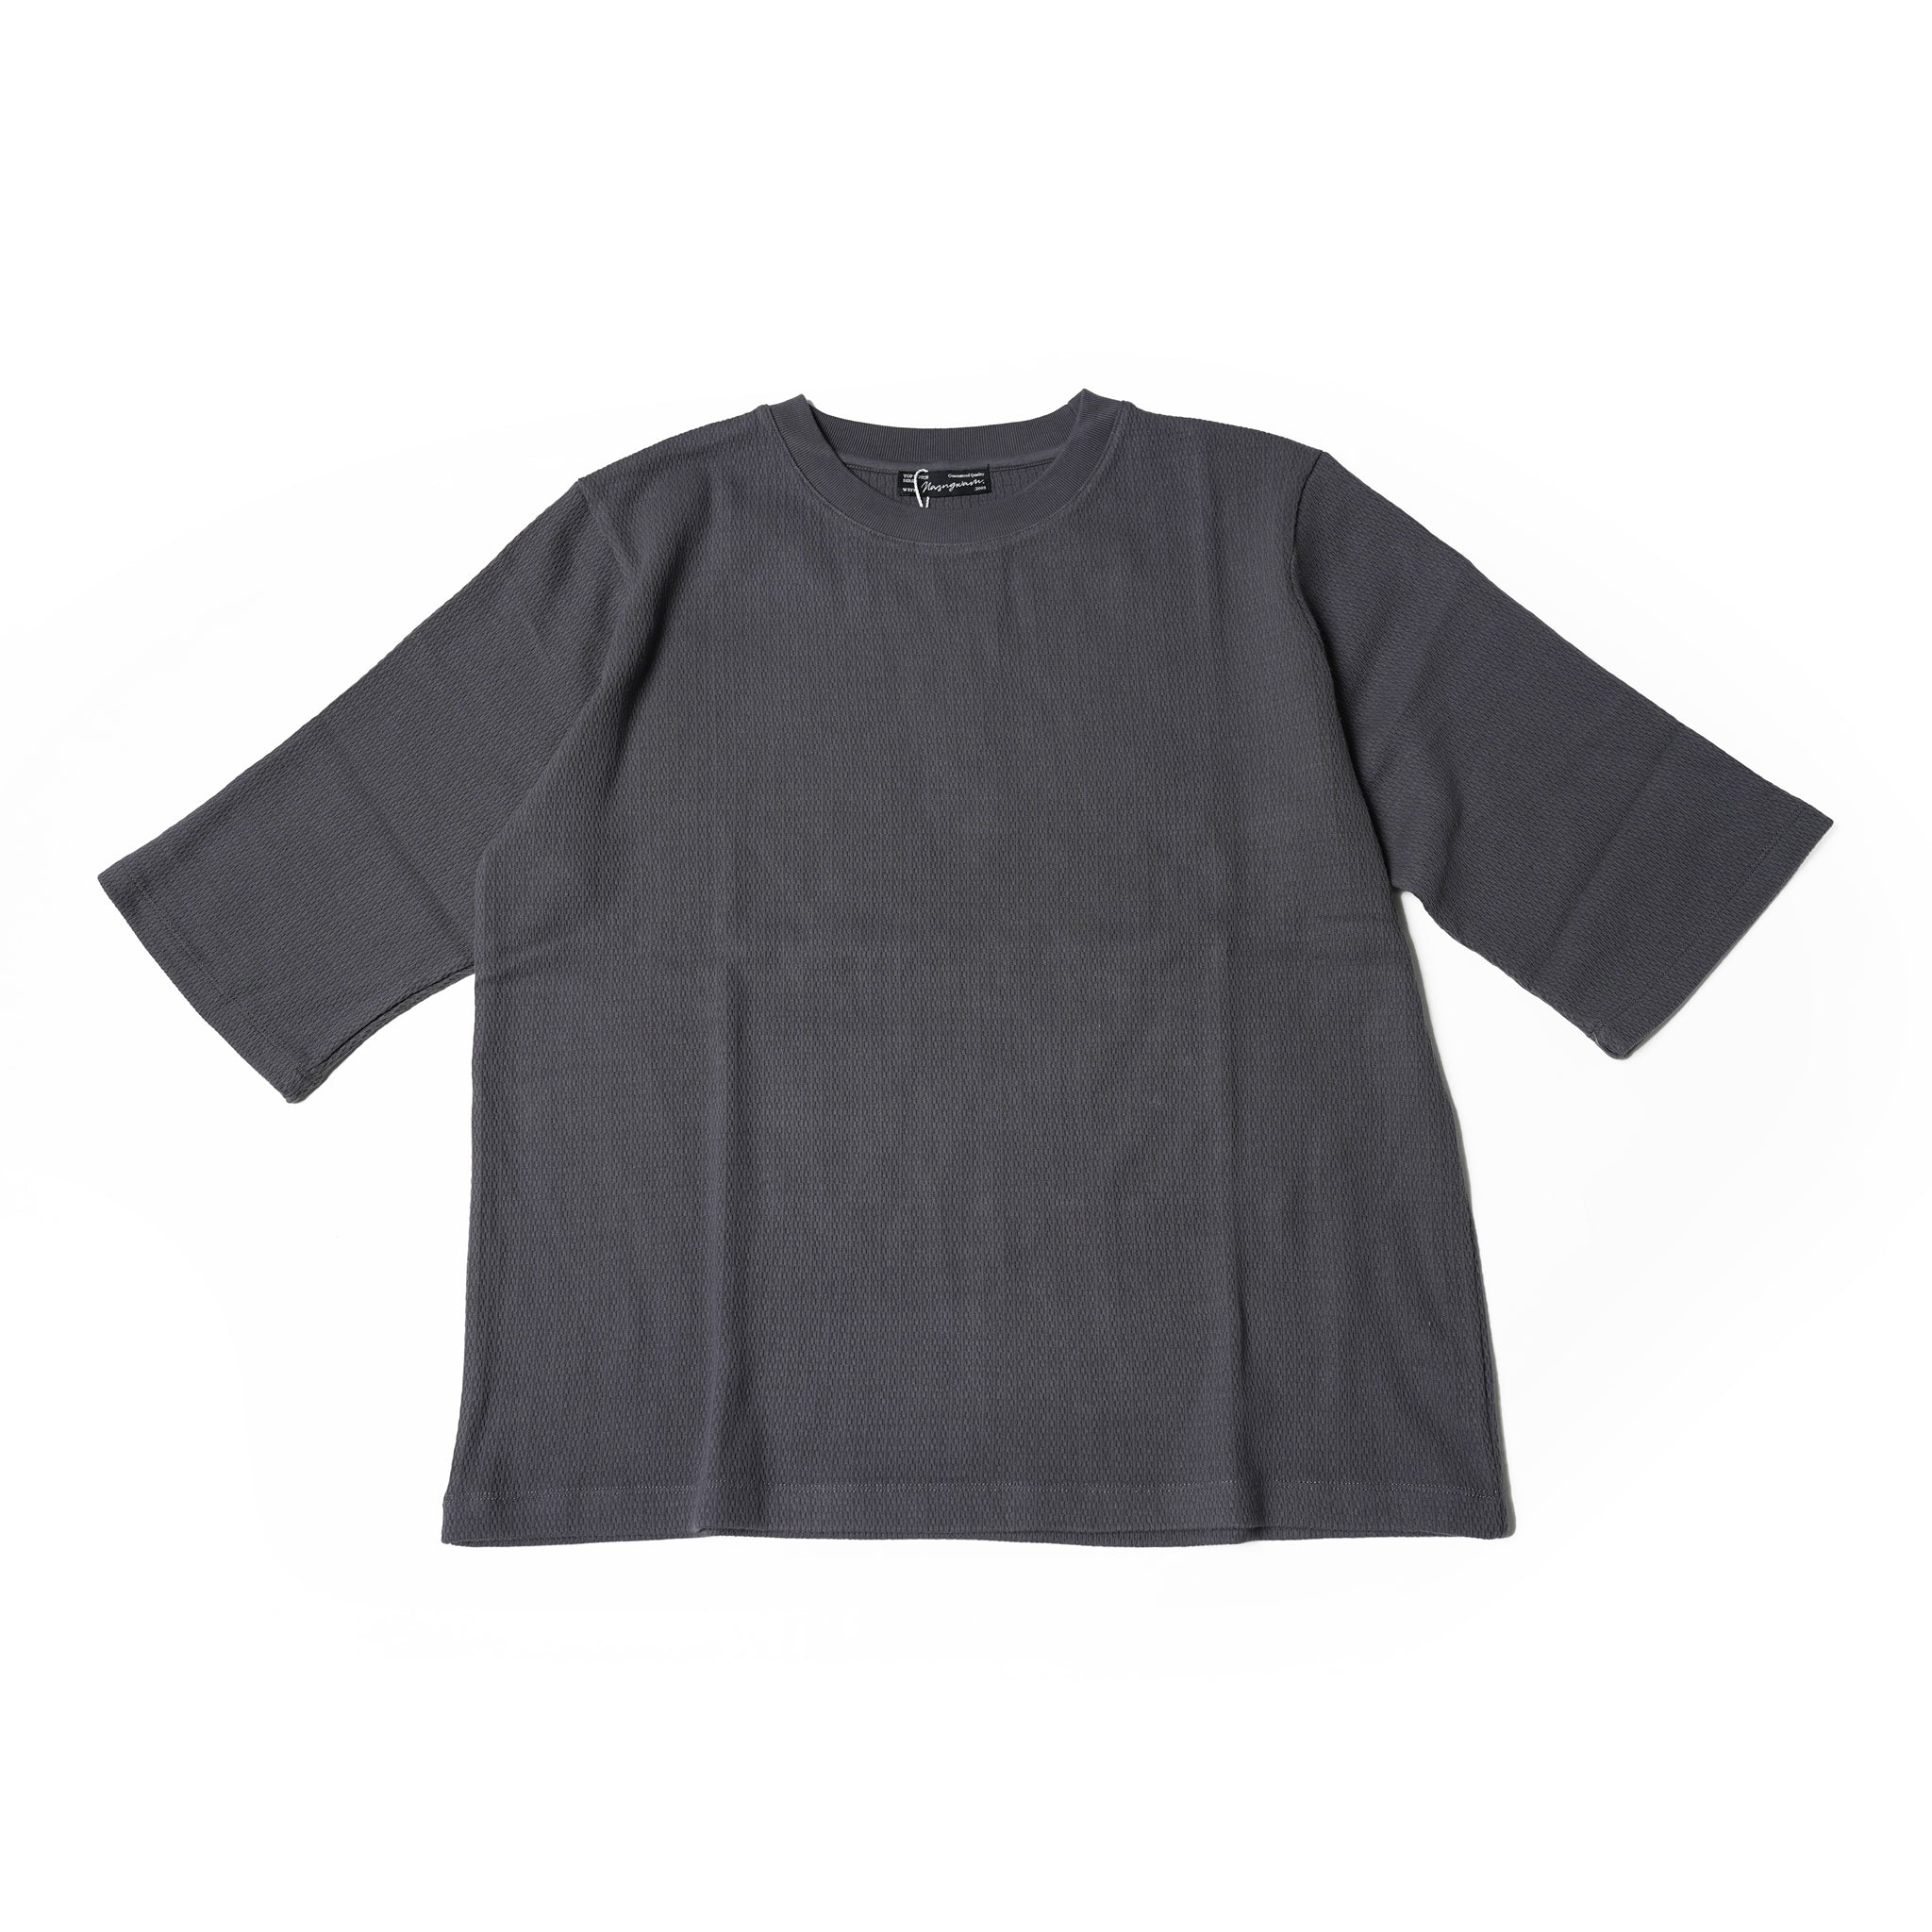 No:C2315907 | Name:ANY TIME TEE | Color:01-Natural/02-Charcoal【NASNGWAM_ナスングワム】